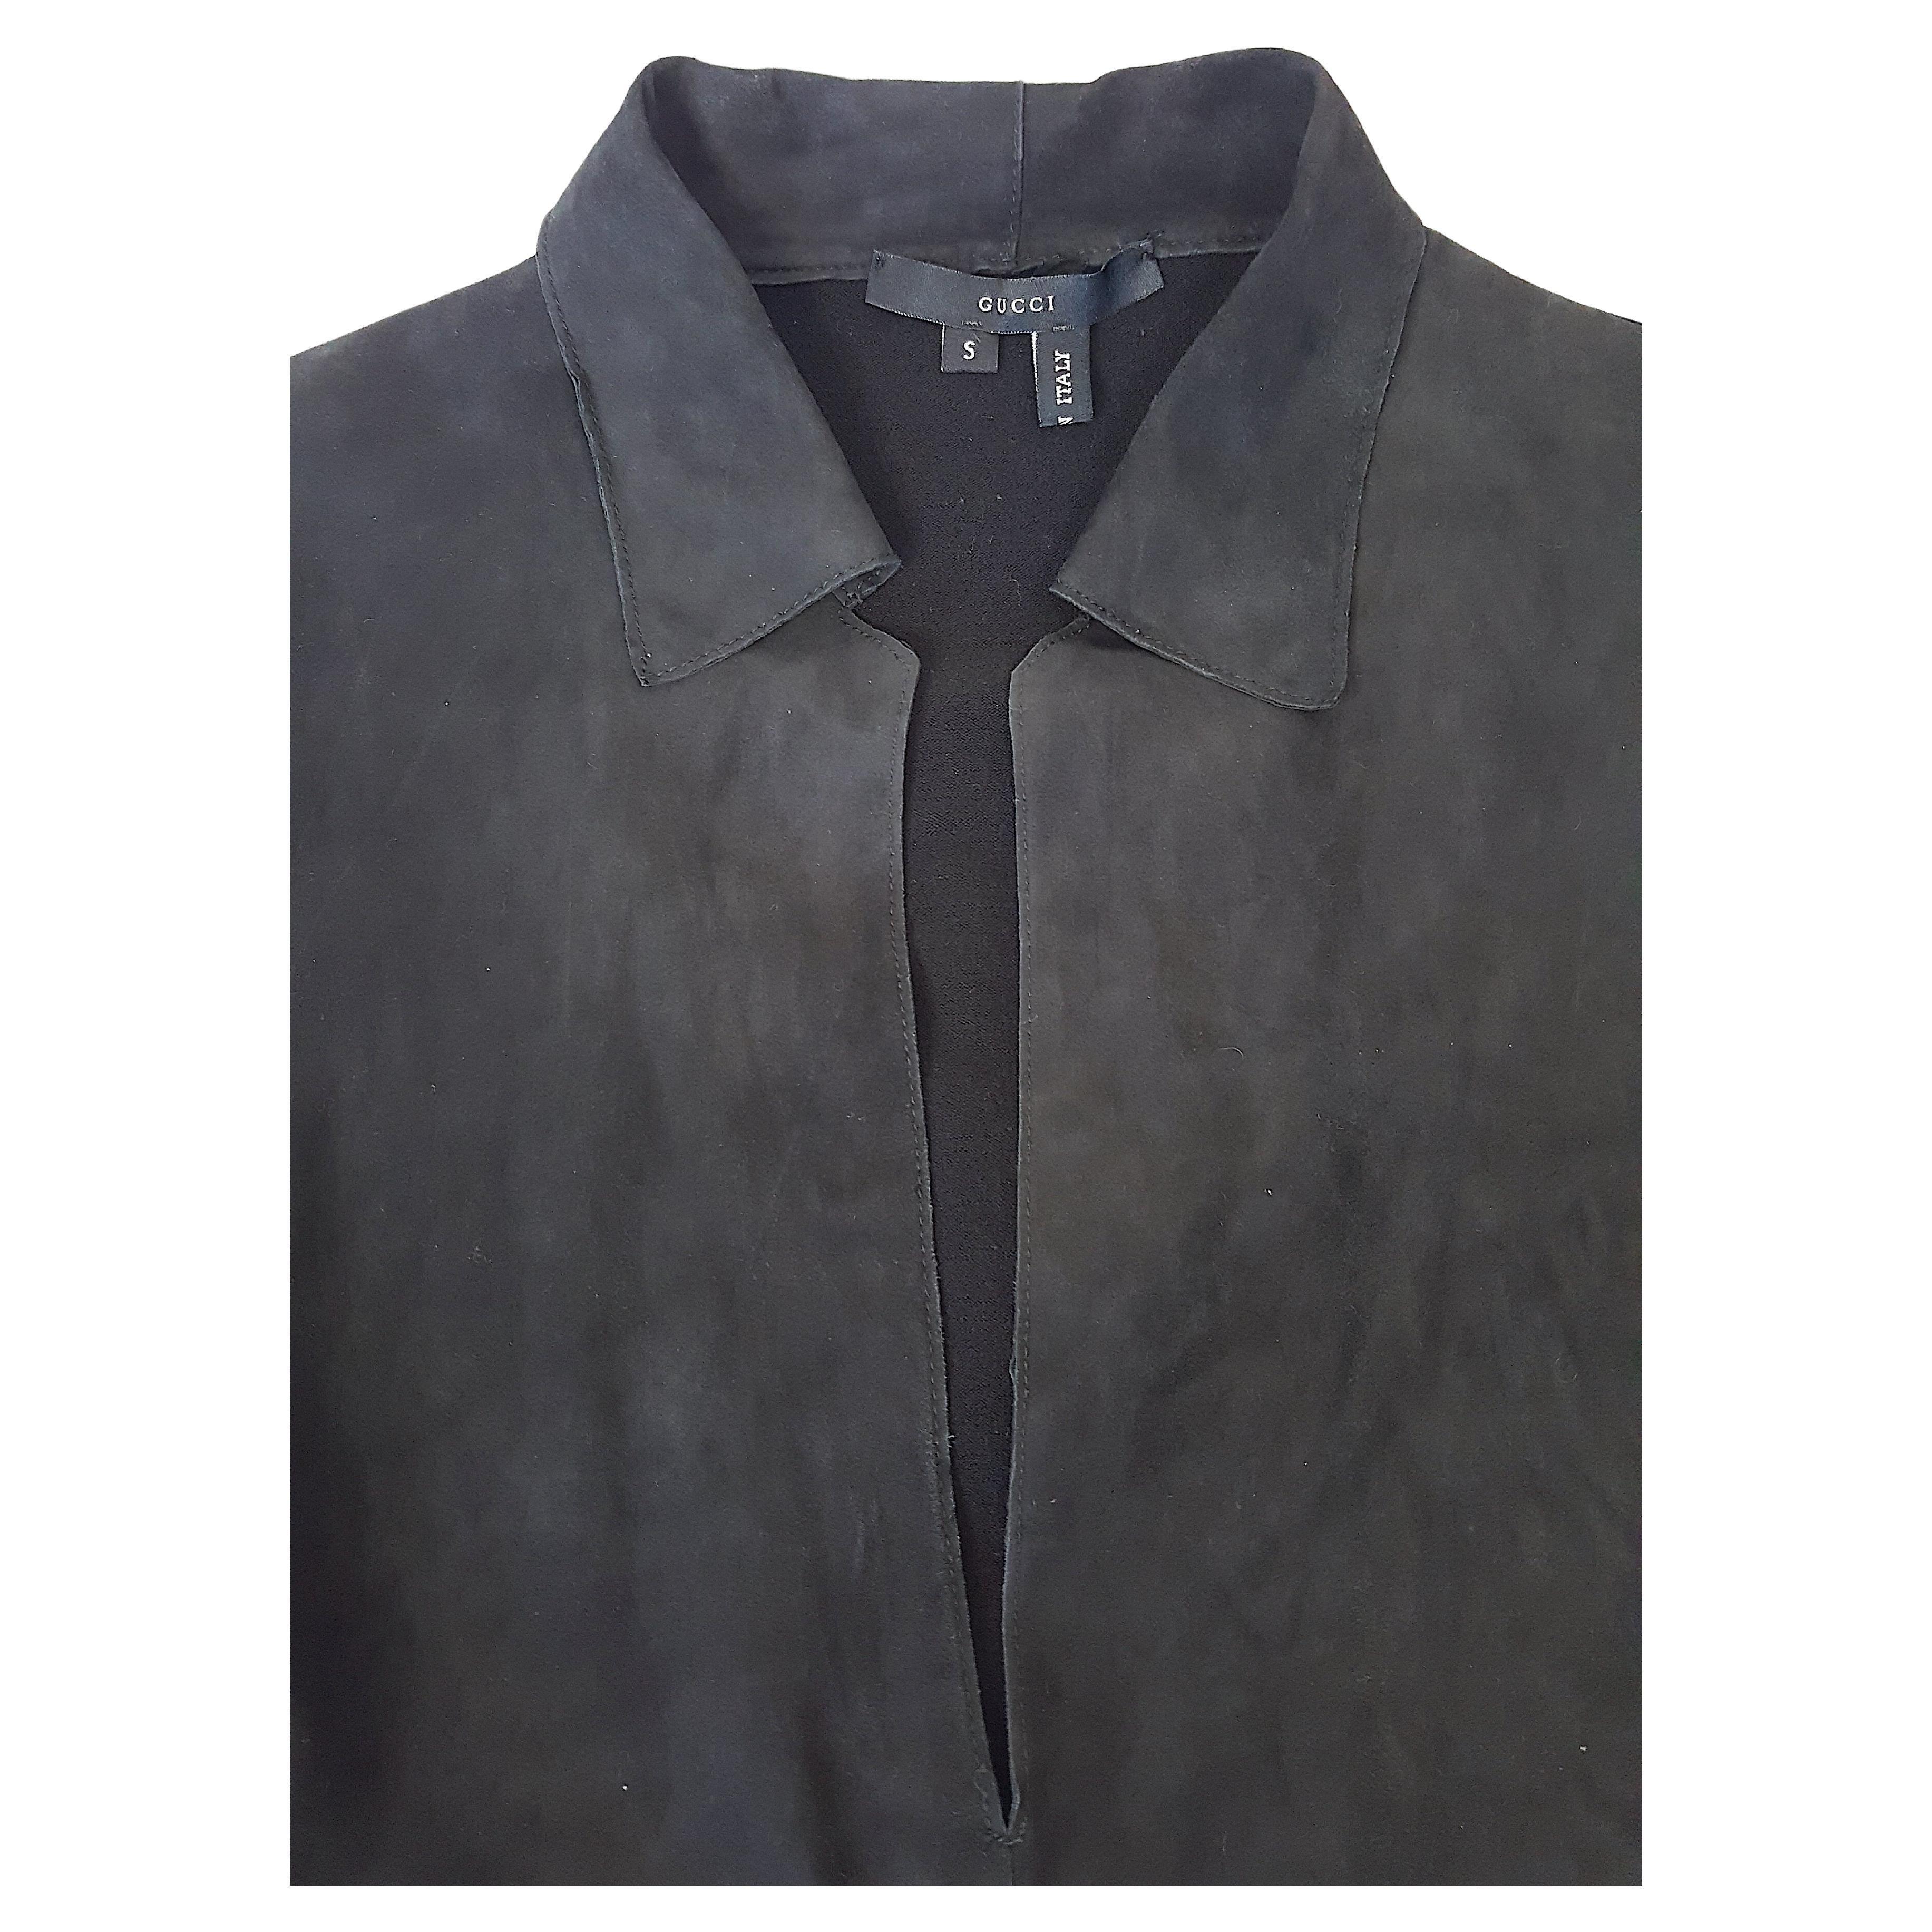 For his Gucci Fall/Winter 2001 collection, American Tom Ford designed this sleek partly-knit pullover tunic with plunging V-neck collared suede front that drapes in a reverse V-shape on the torso. It is paired for warmth with stretch-wool on the